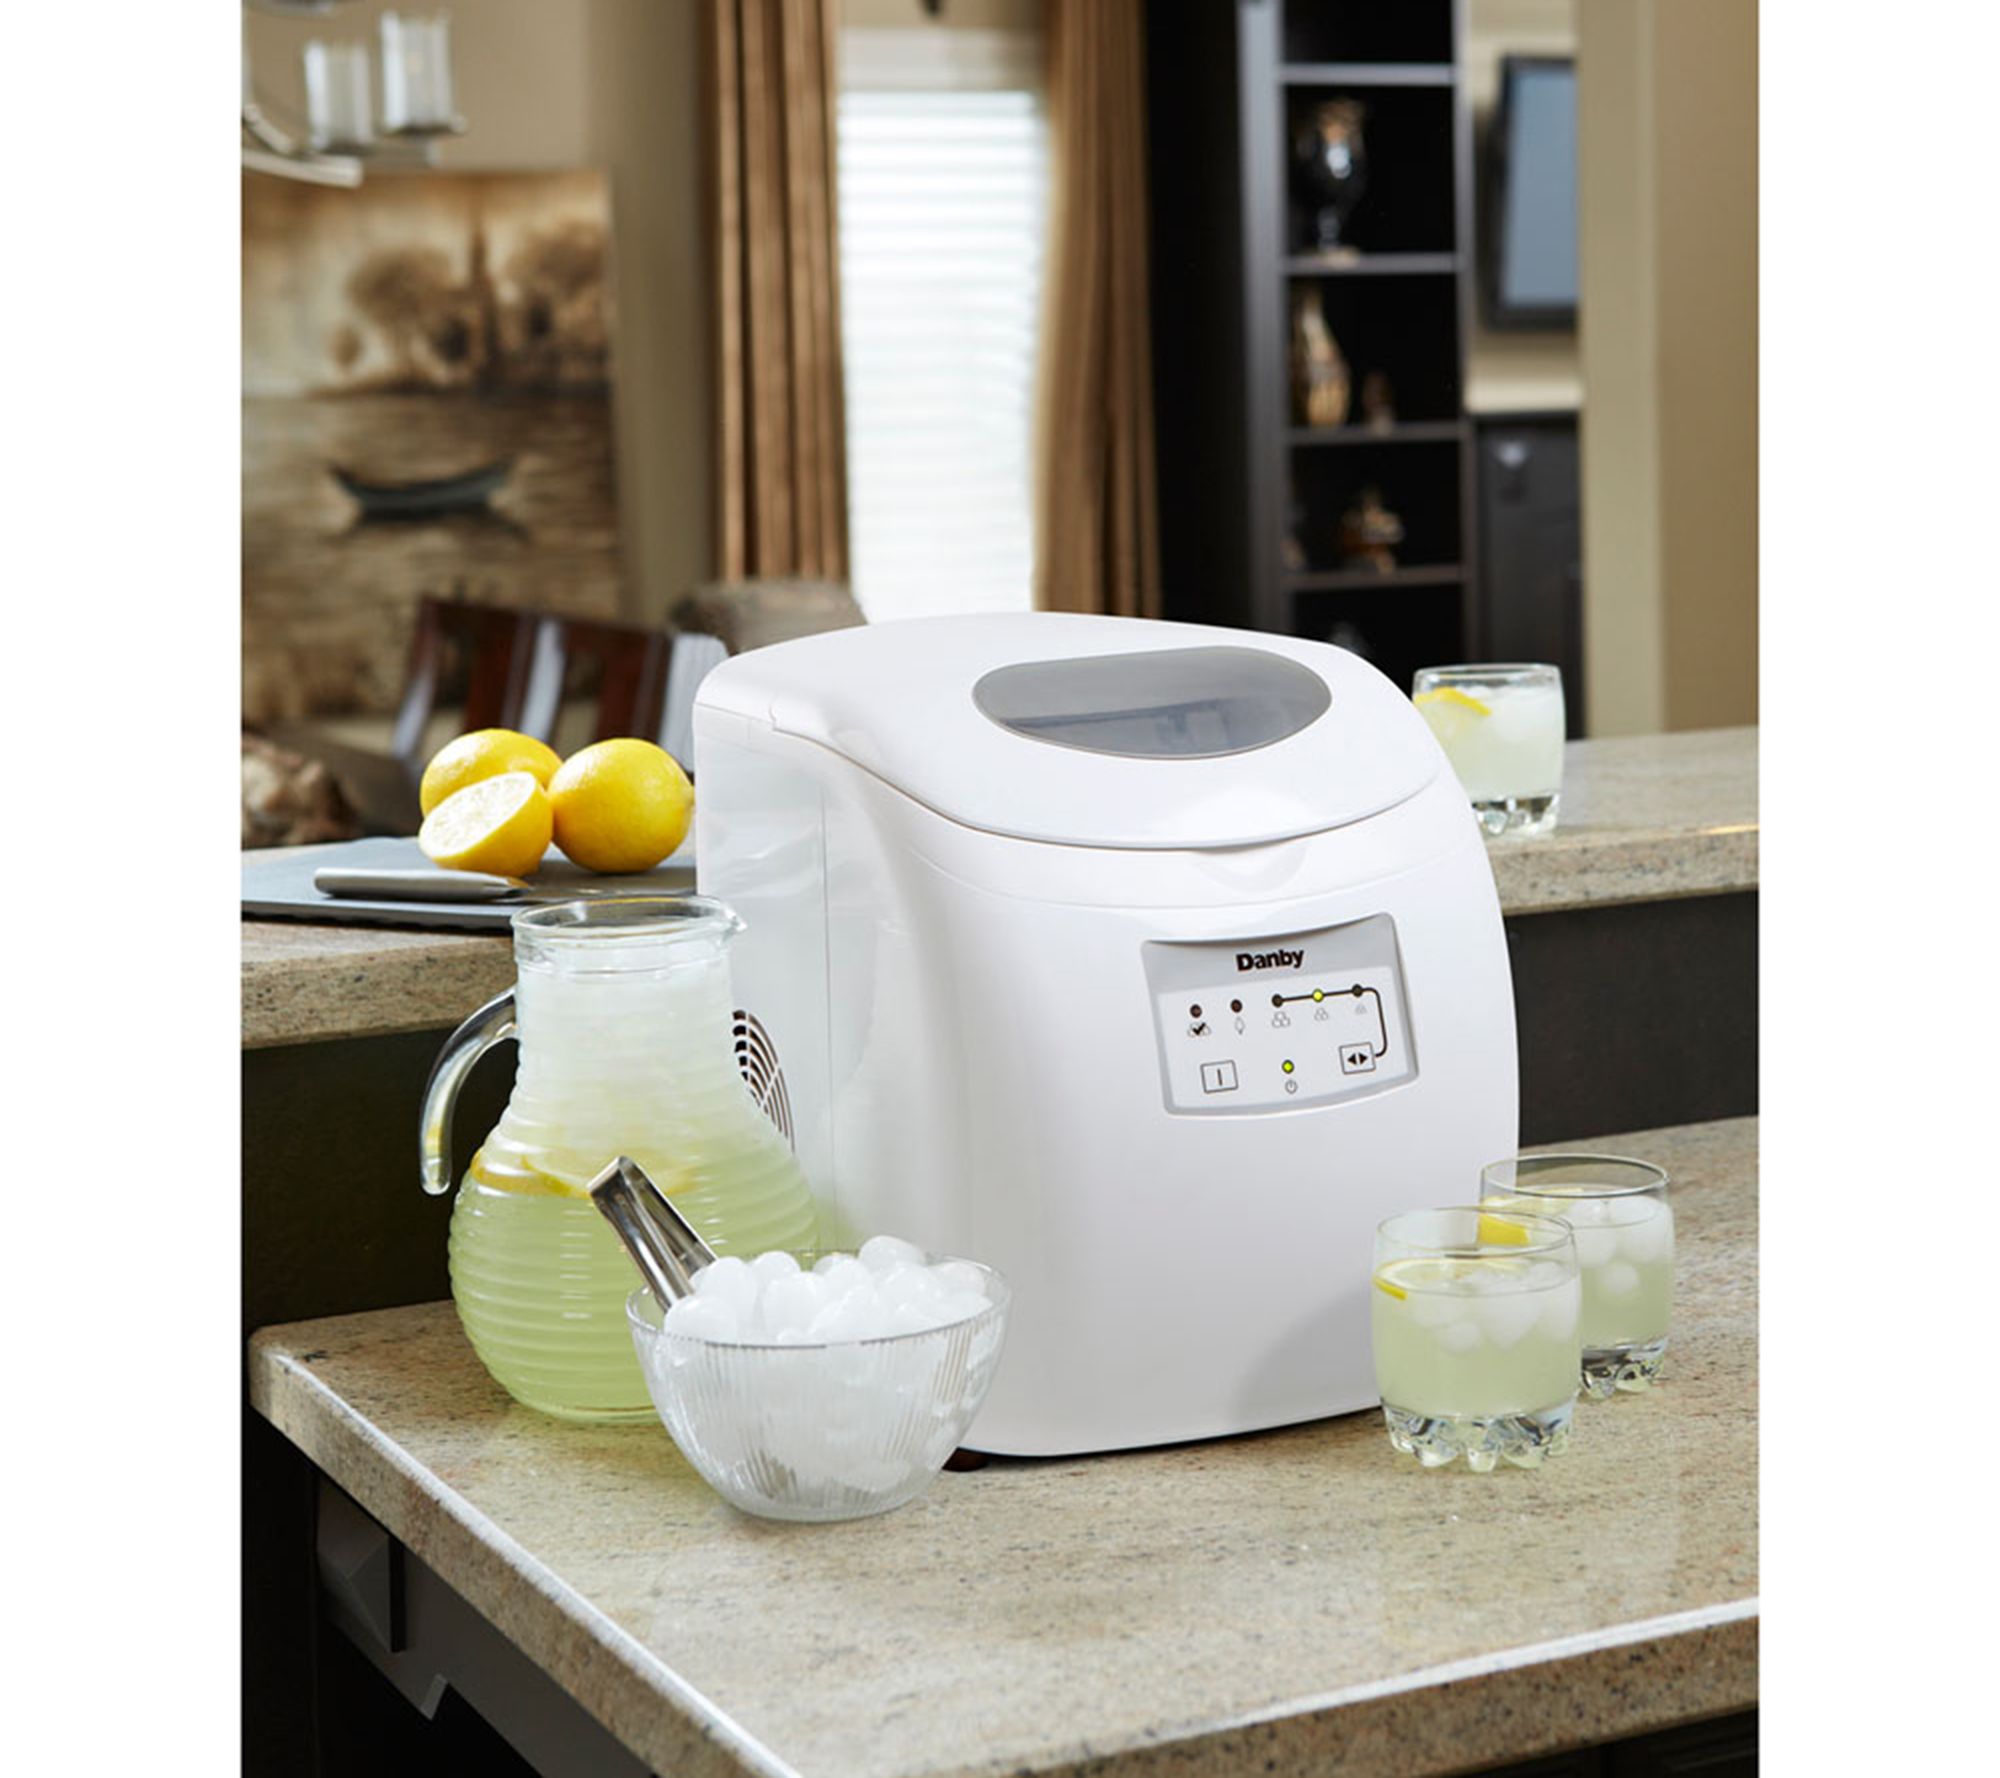 Danby DIM2500SSDB, Counter Top Ice Maker, 1 Ice Cube Size, Produces Up To  25lbs a Day and Holds 2lbs of Ice, Electronic Controls, LED Display, Alarm